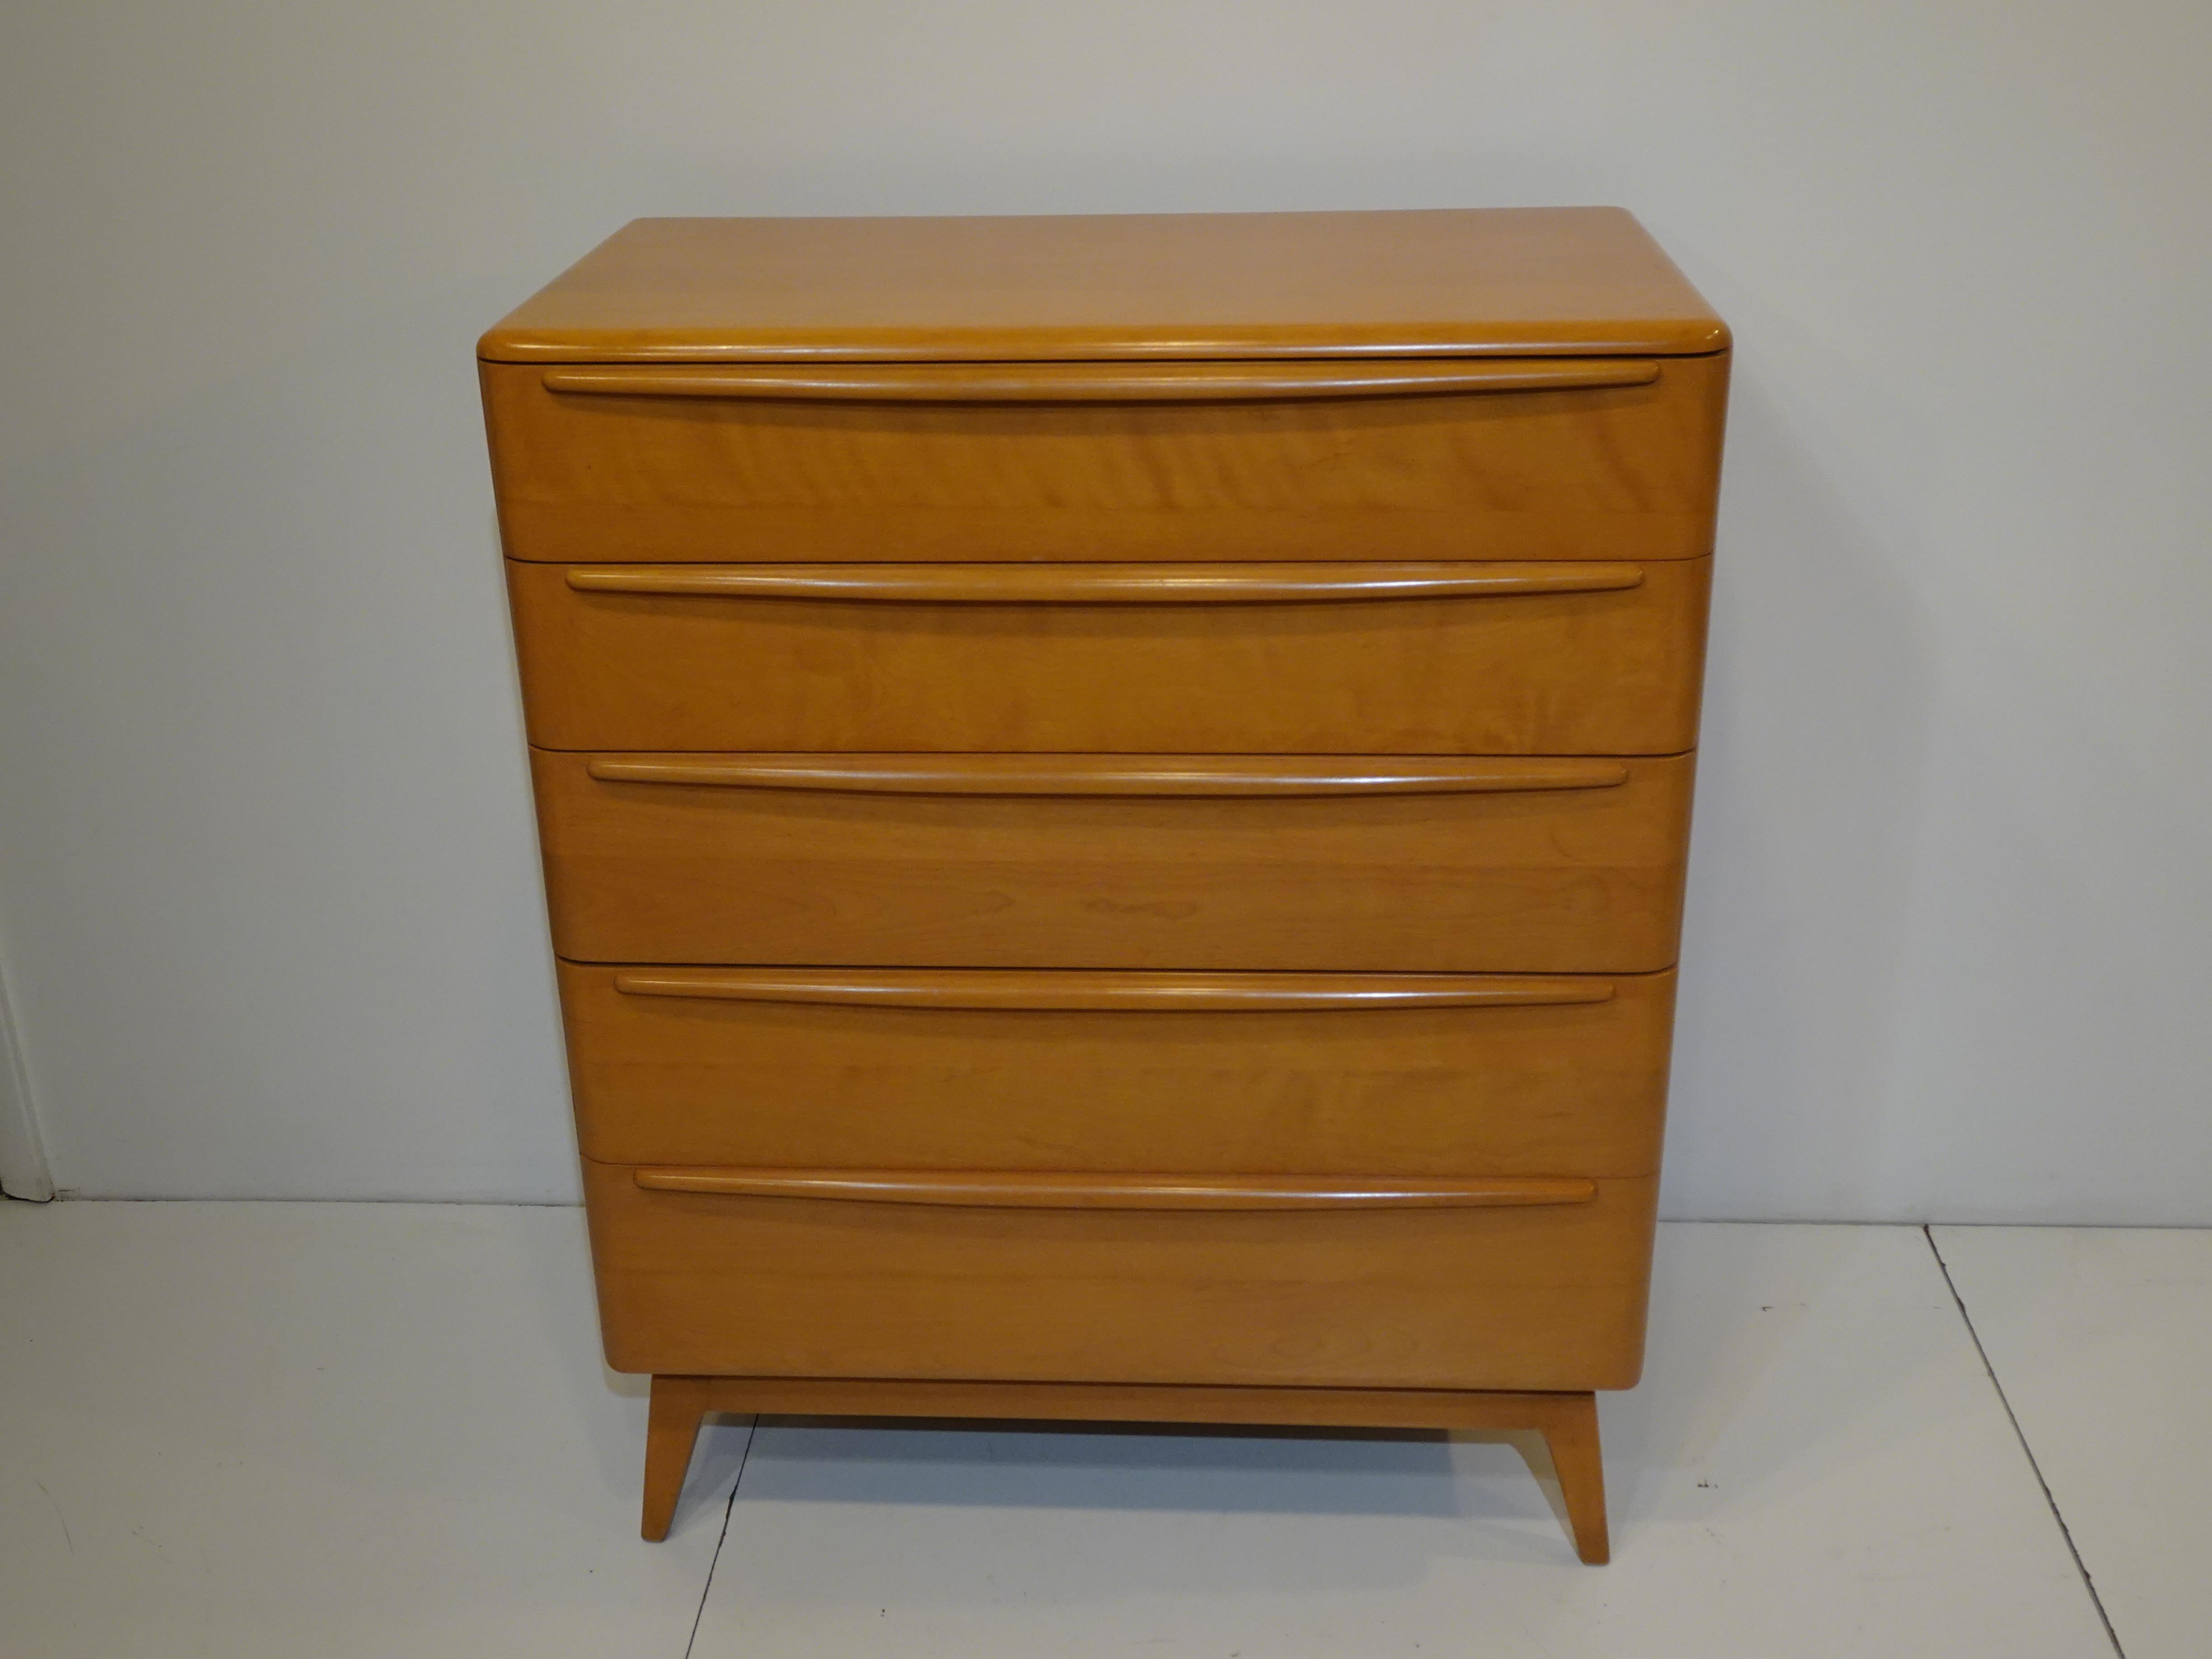 A well crafted solid wood five drawer mid century dresser chest with it's original beautiful Champagne finish. From the Encore collection this piece has the nicely tapered legs and lifted base making the piece feel light and airy. The drawer fronts